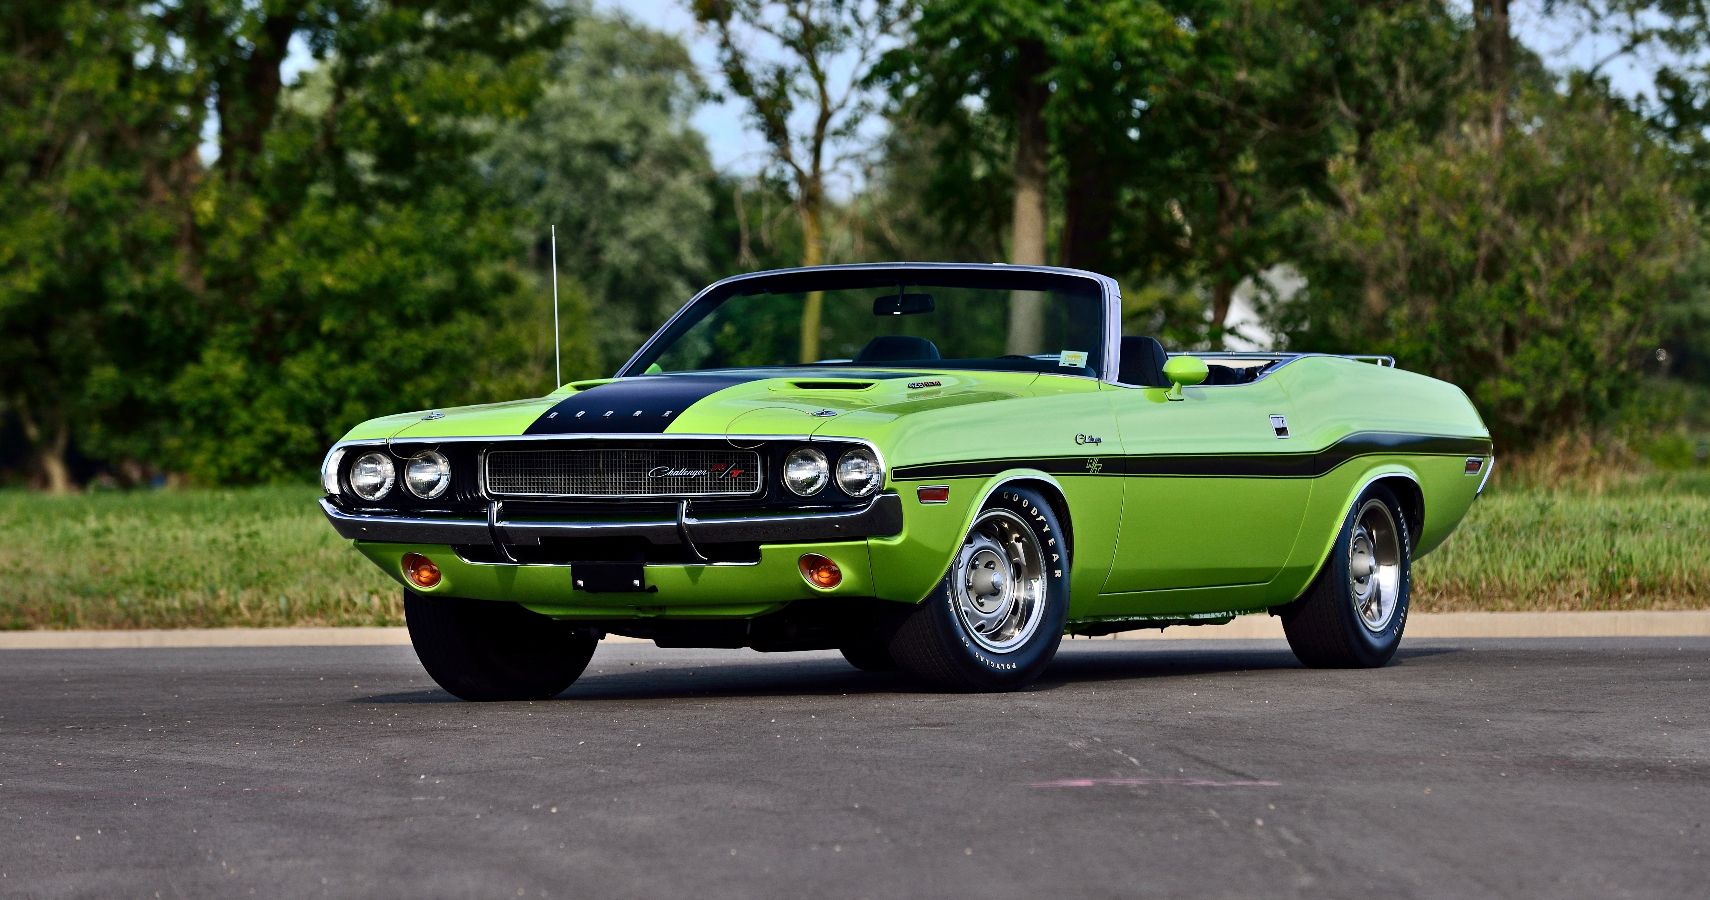 Dodge Challenger R/T in lime green